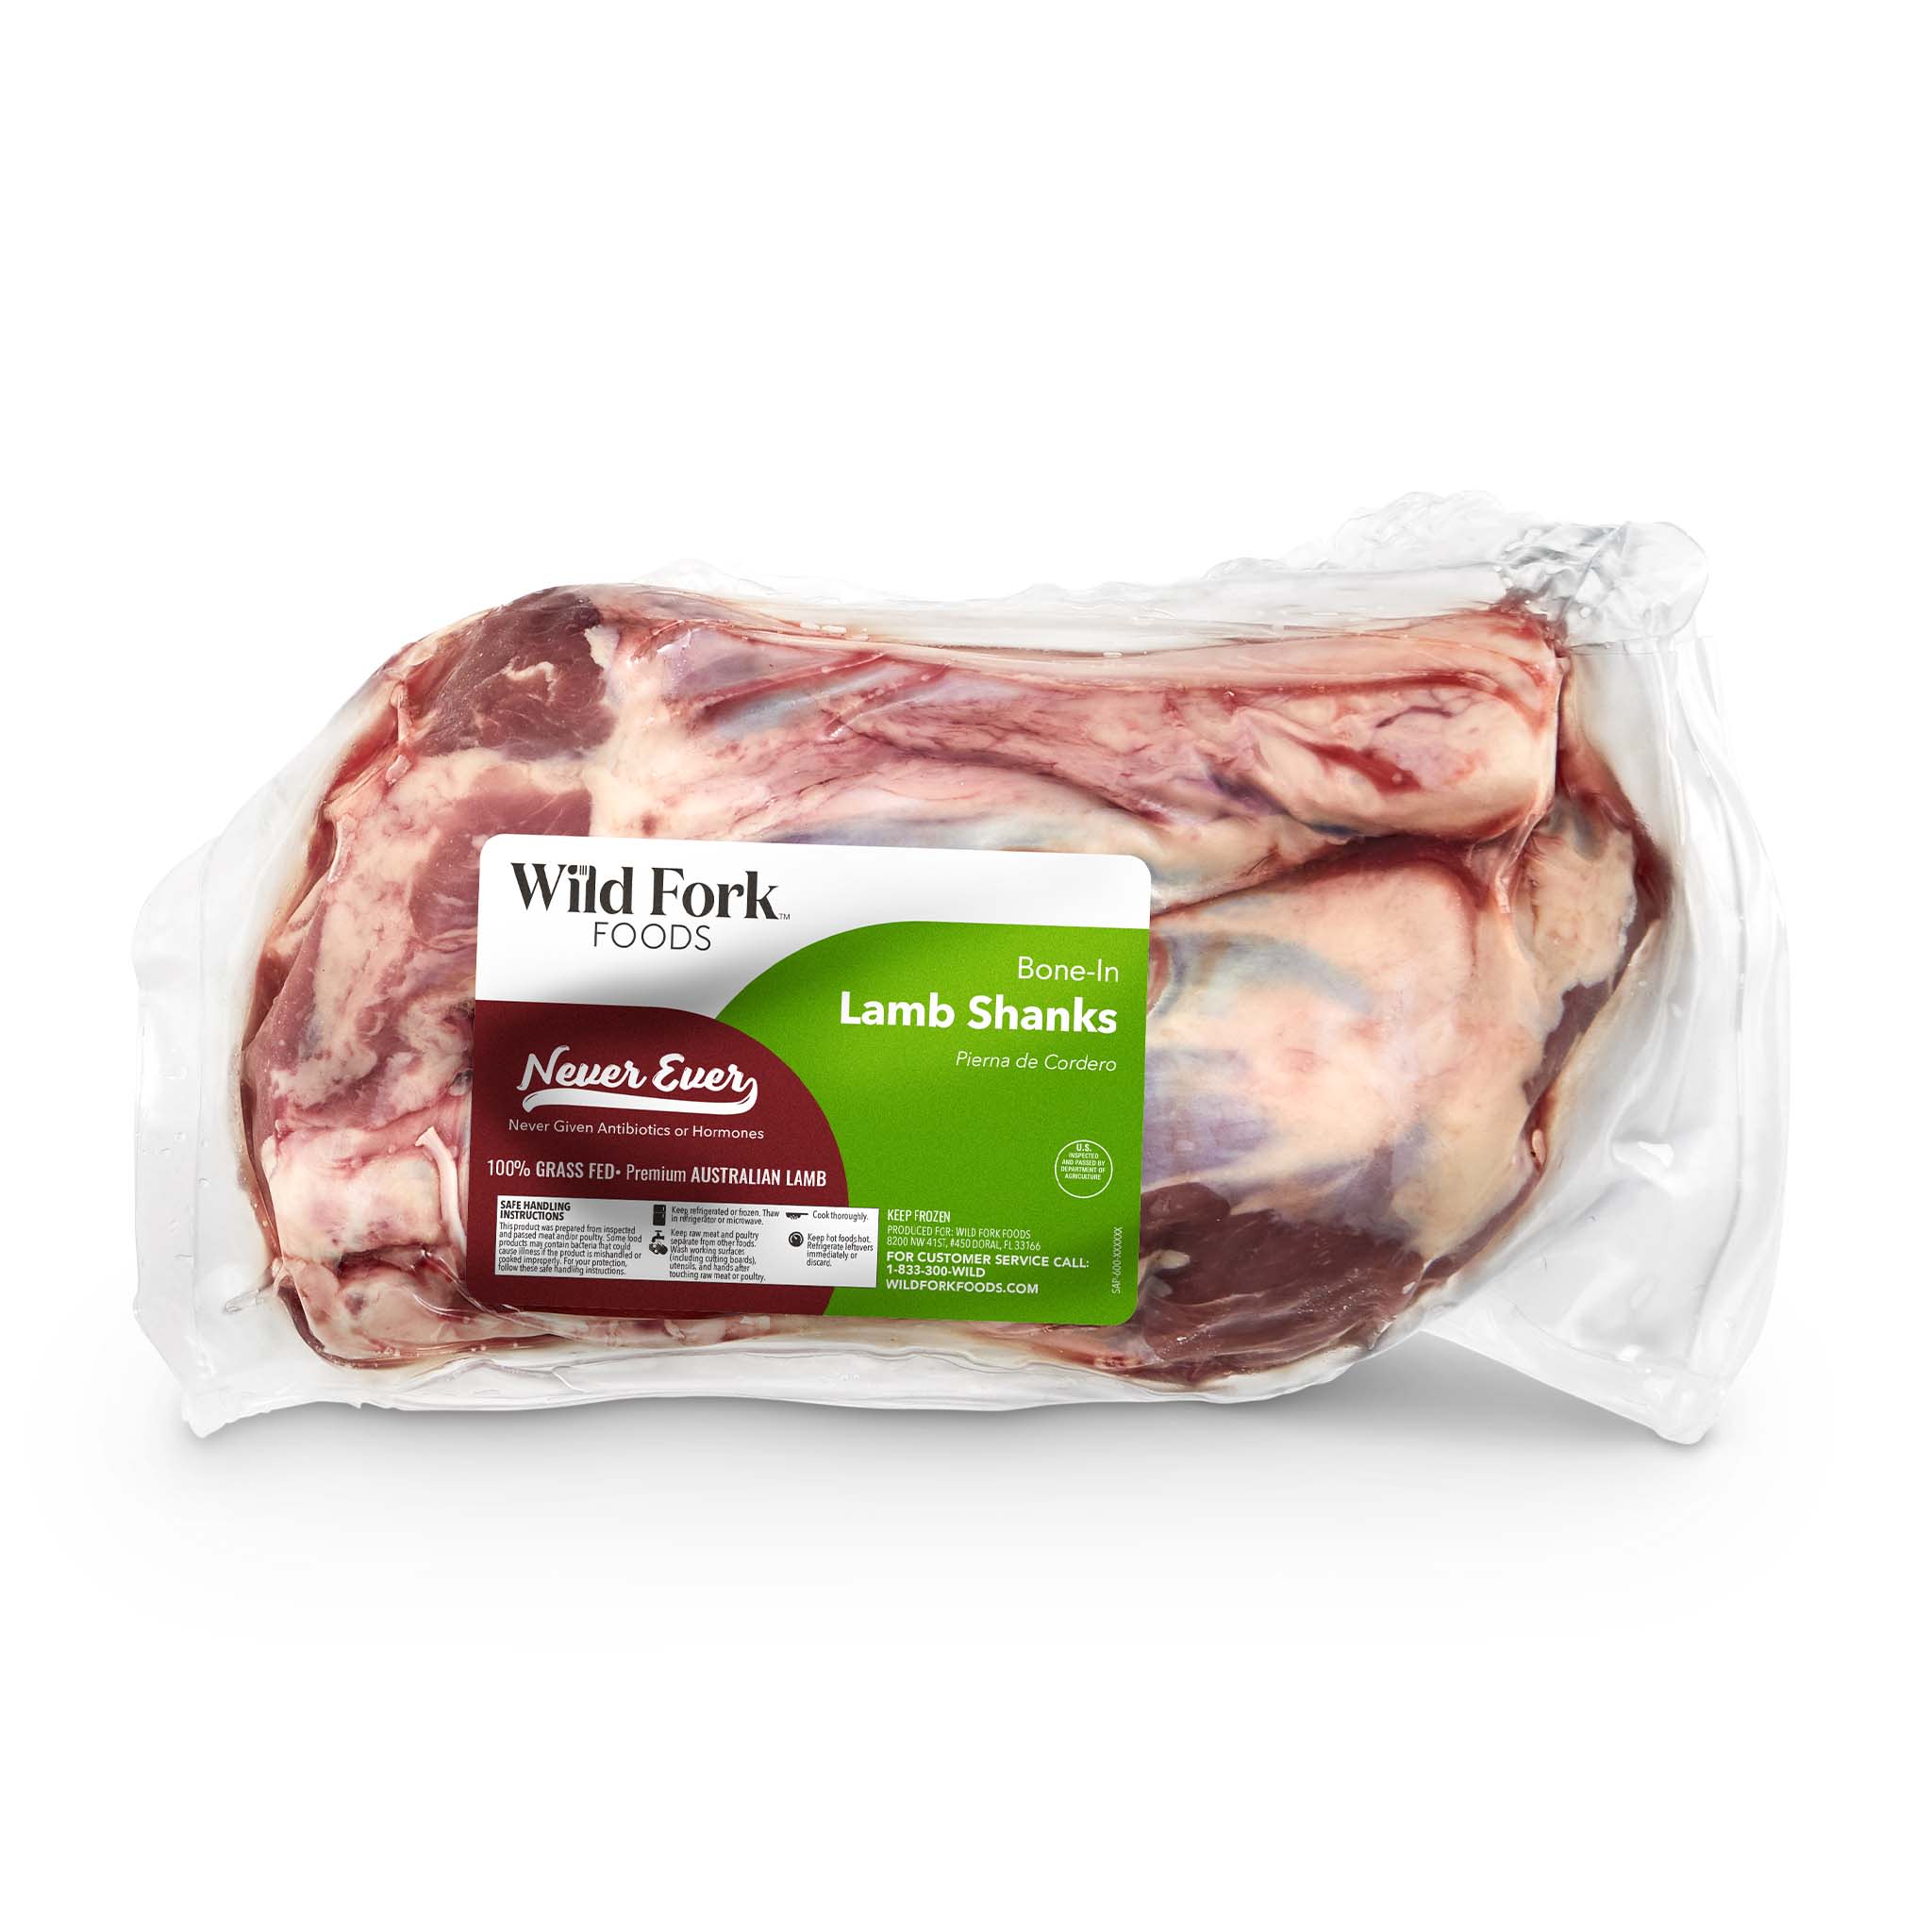 5205 WF PACKAGED Lamb Shanks SPECIALTY MEATS